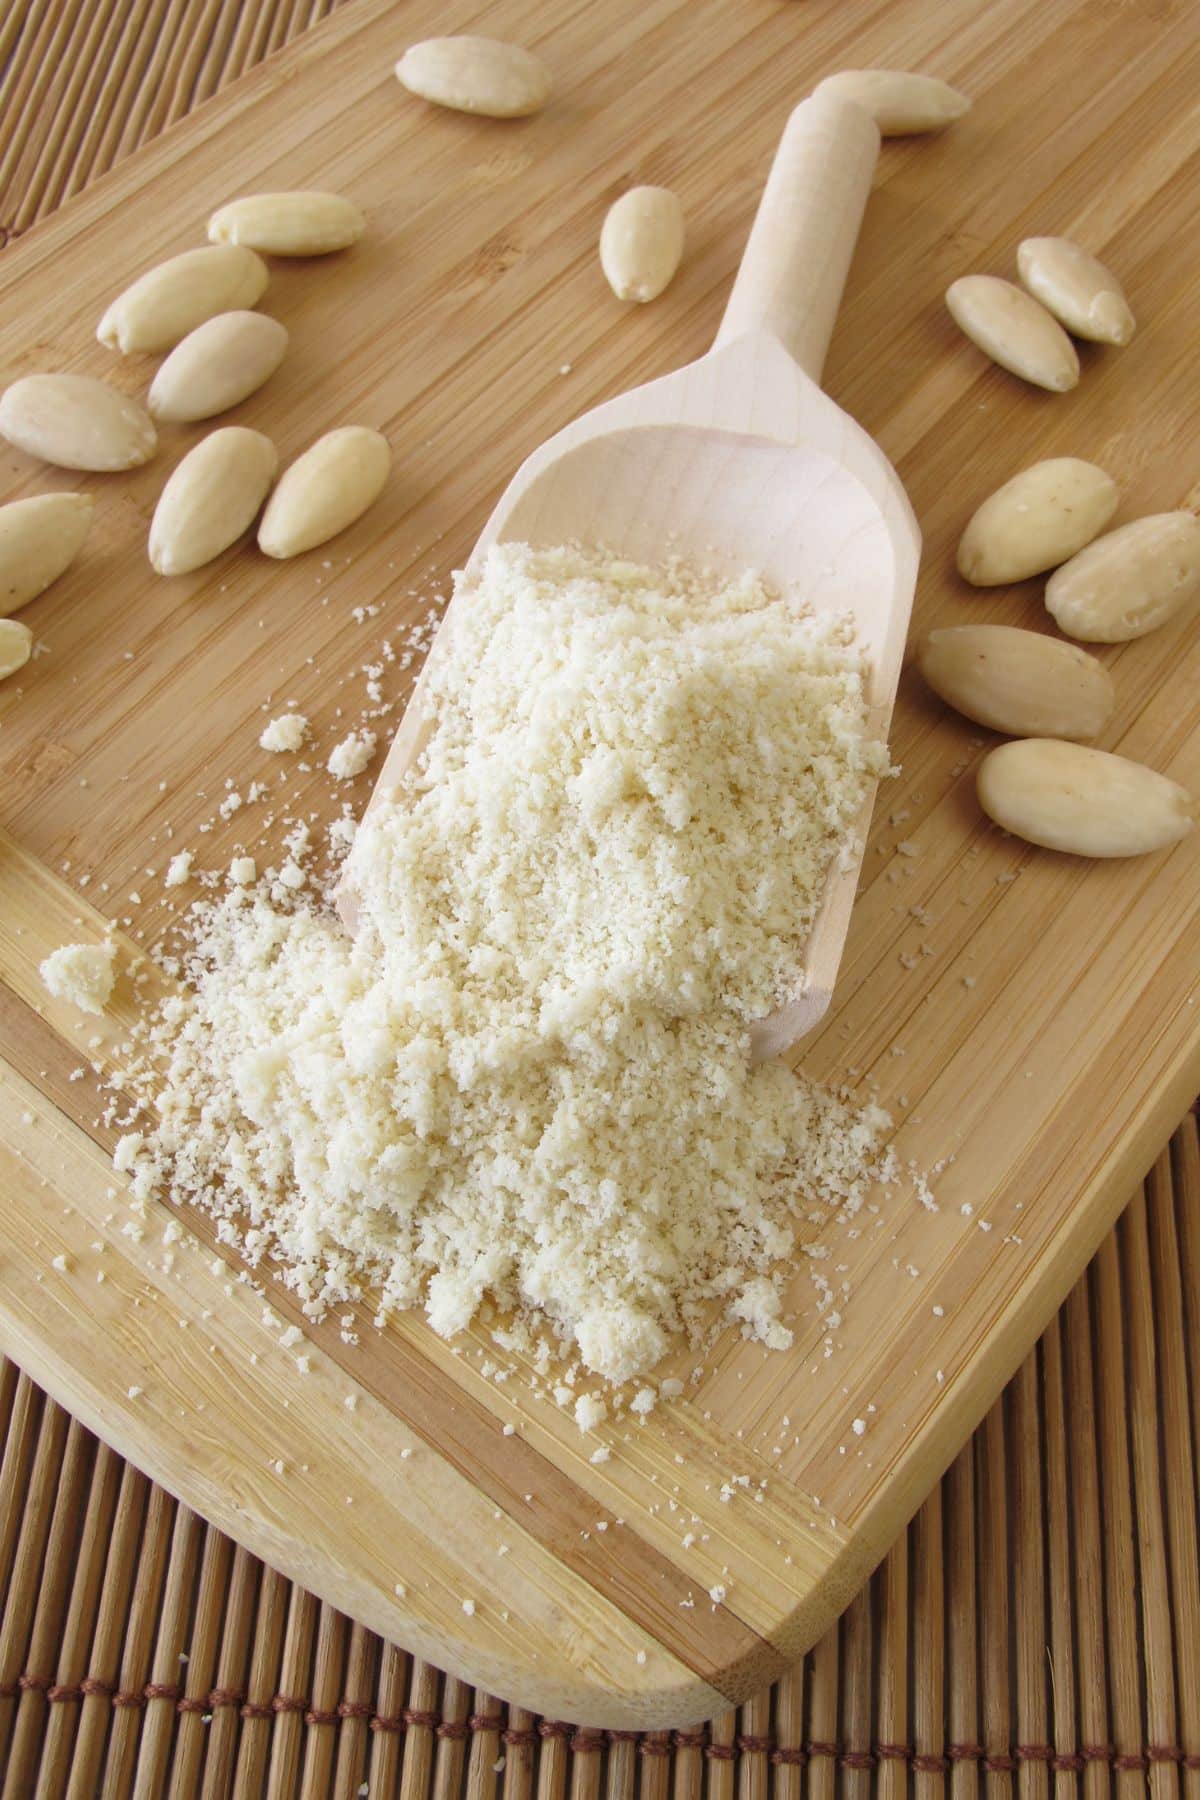 Wooden scoop with almond flour and raw almonds.